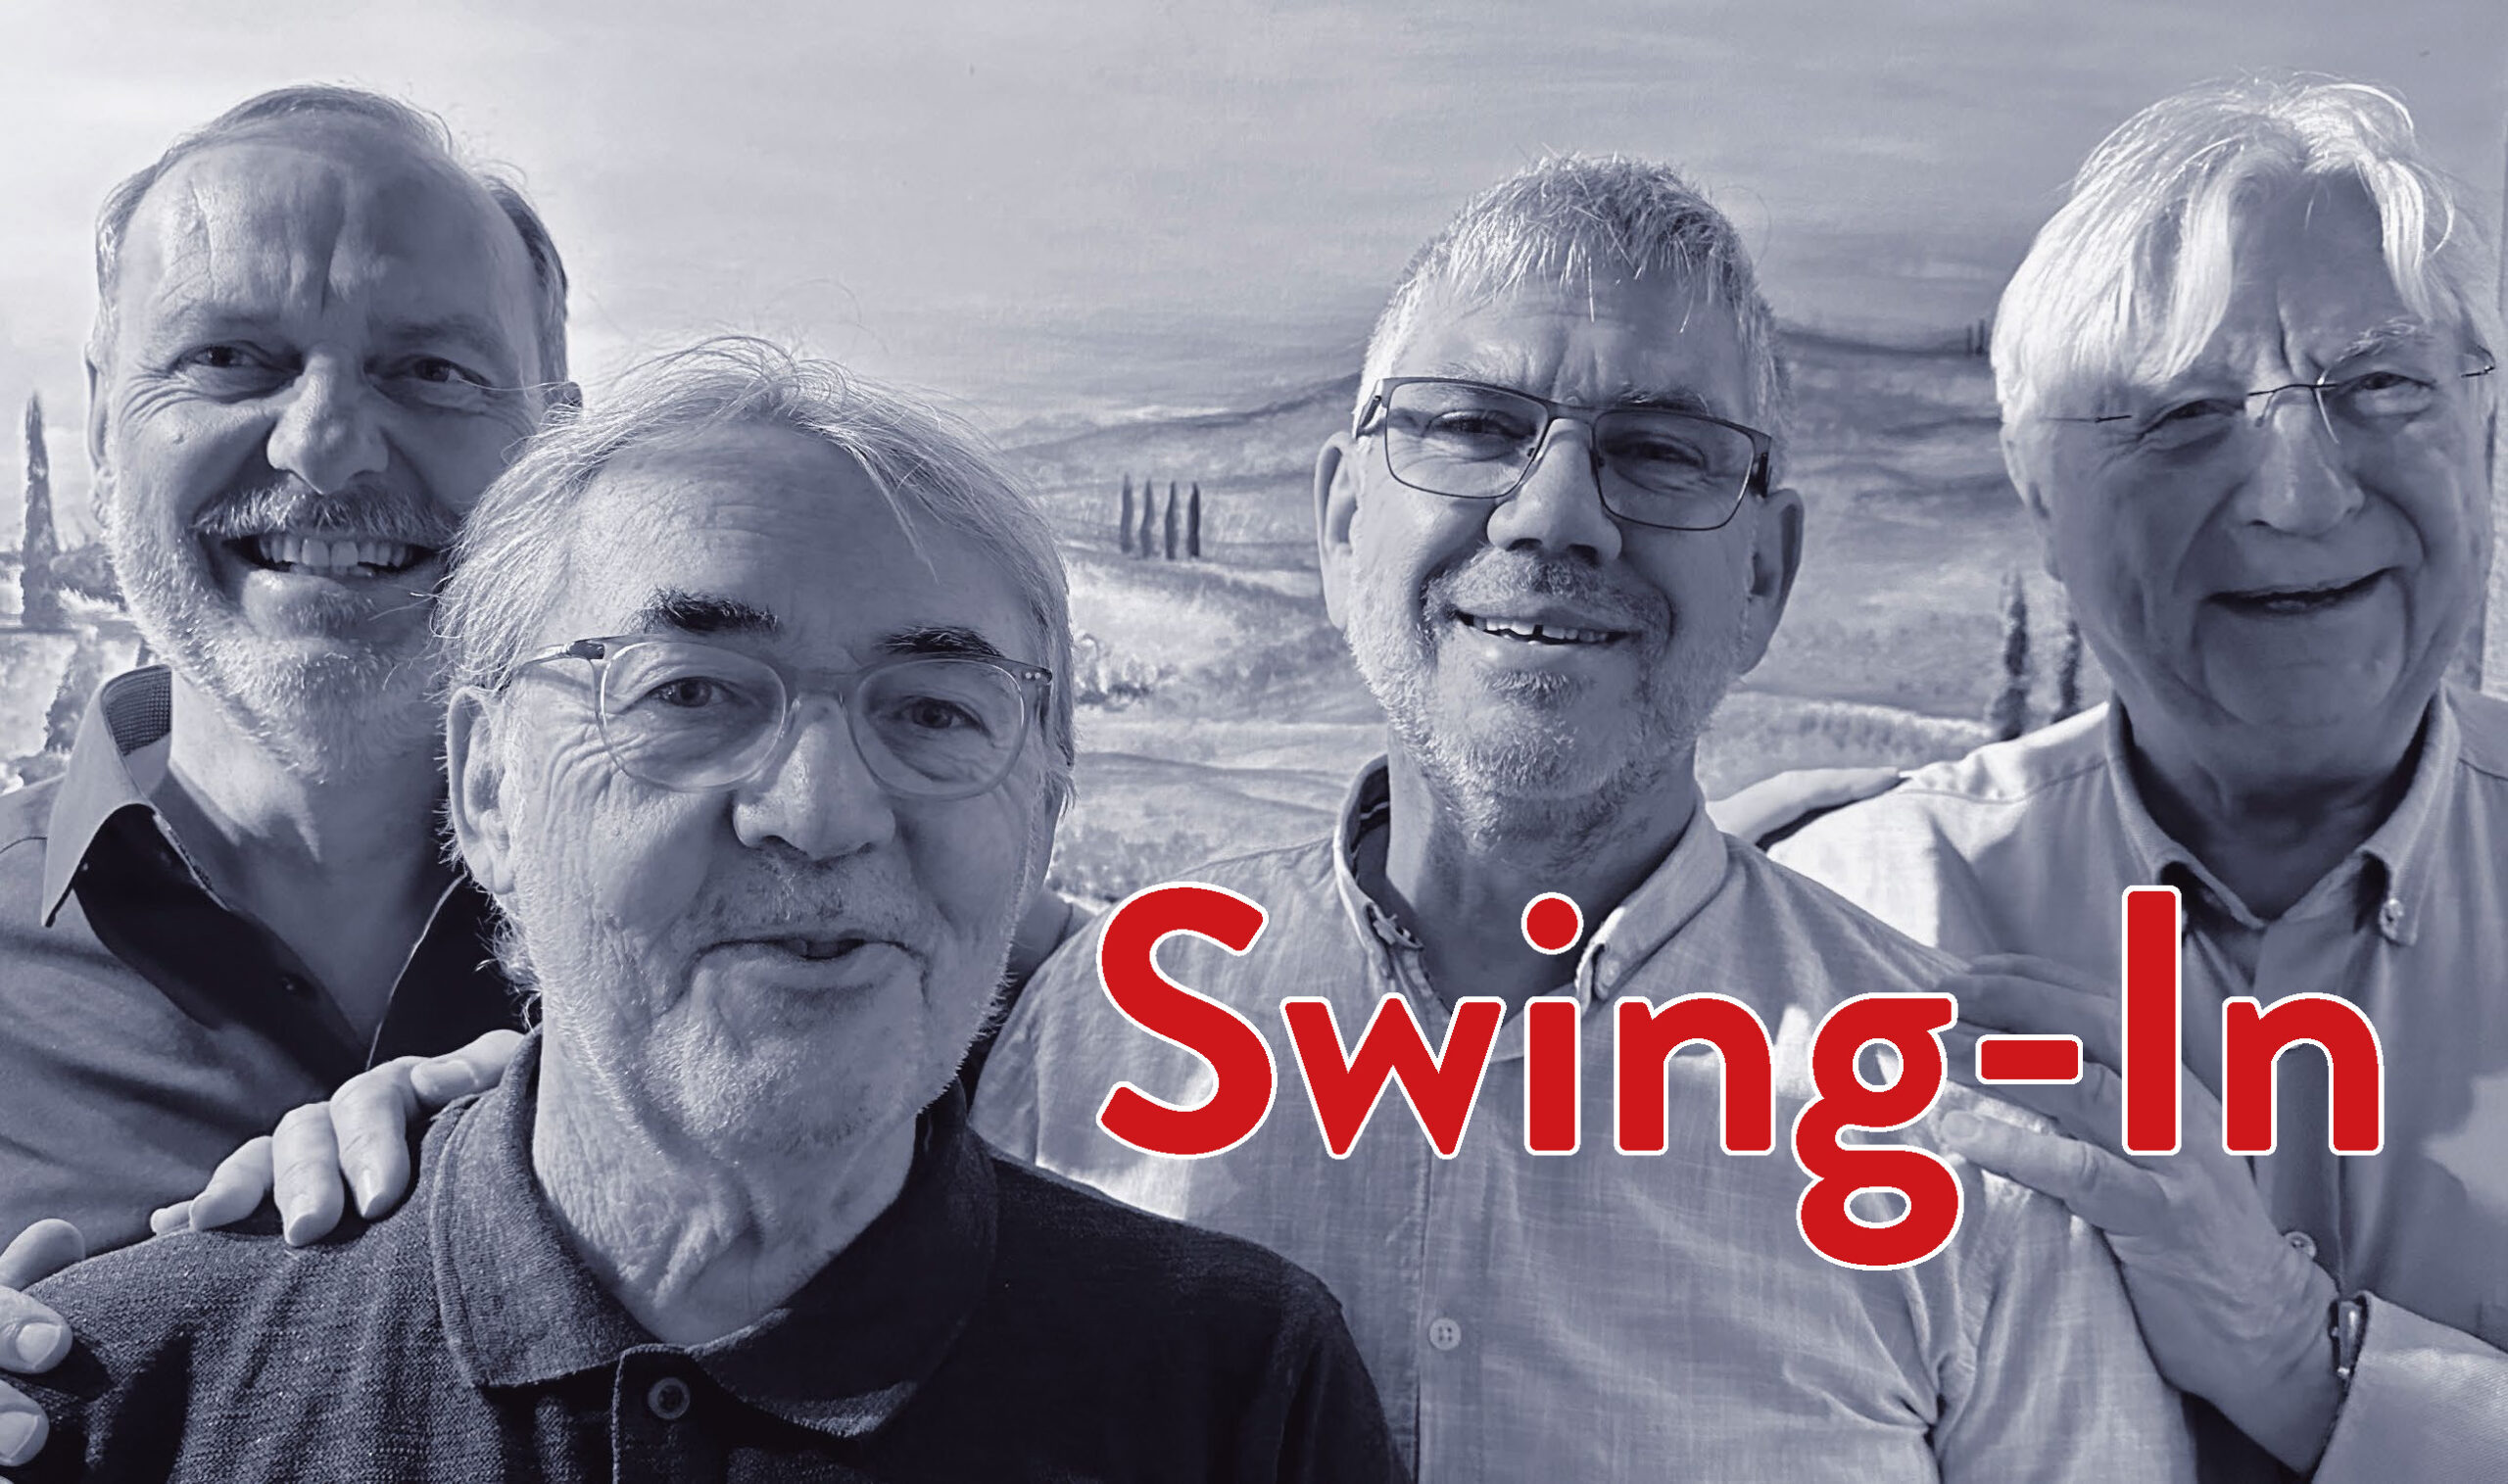 Badehaisel Jazz Abend mit Swing In